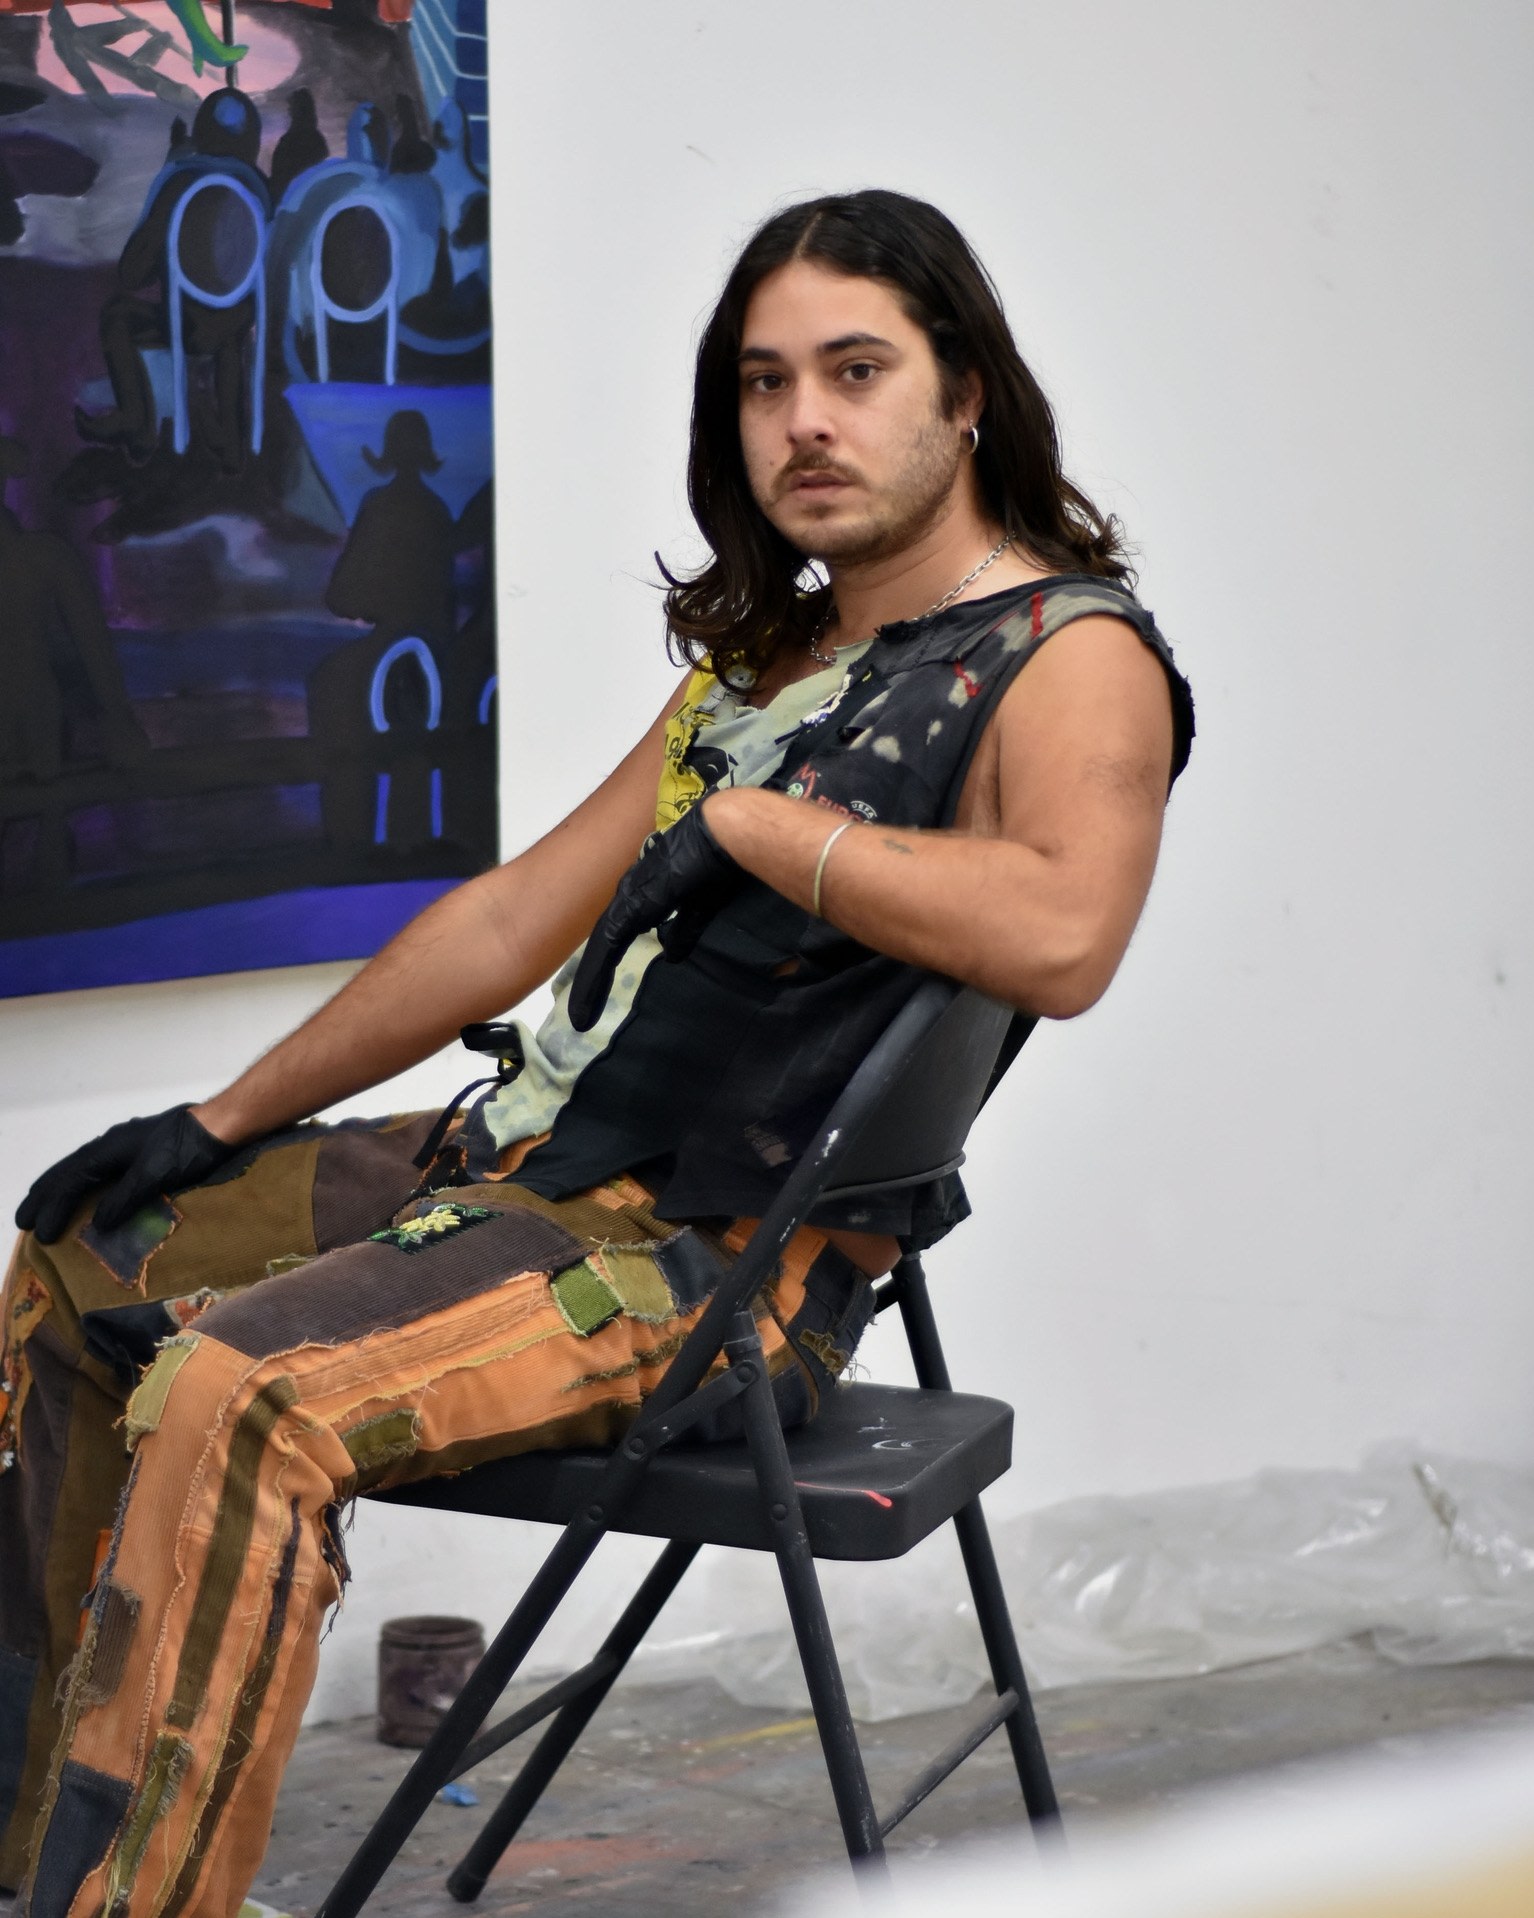 Marcel Alcal&amp;aacute; in the studio, 2021.&amp;nbsp;Photograph by Jayne Kim

400px